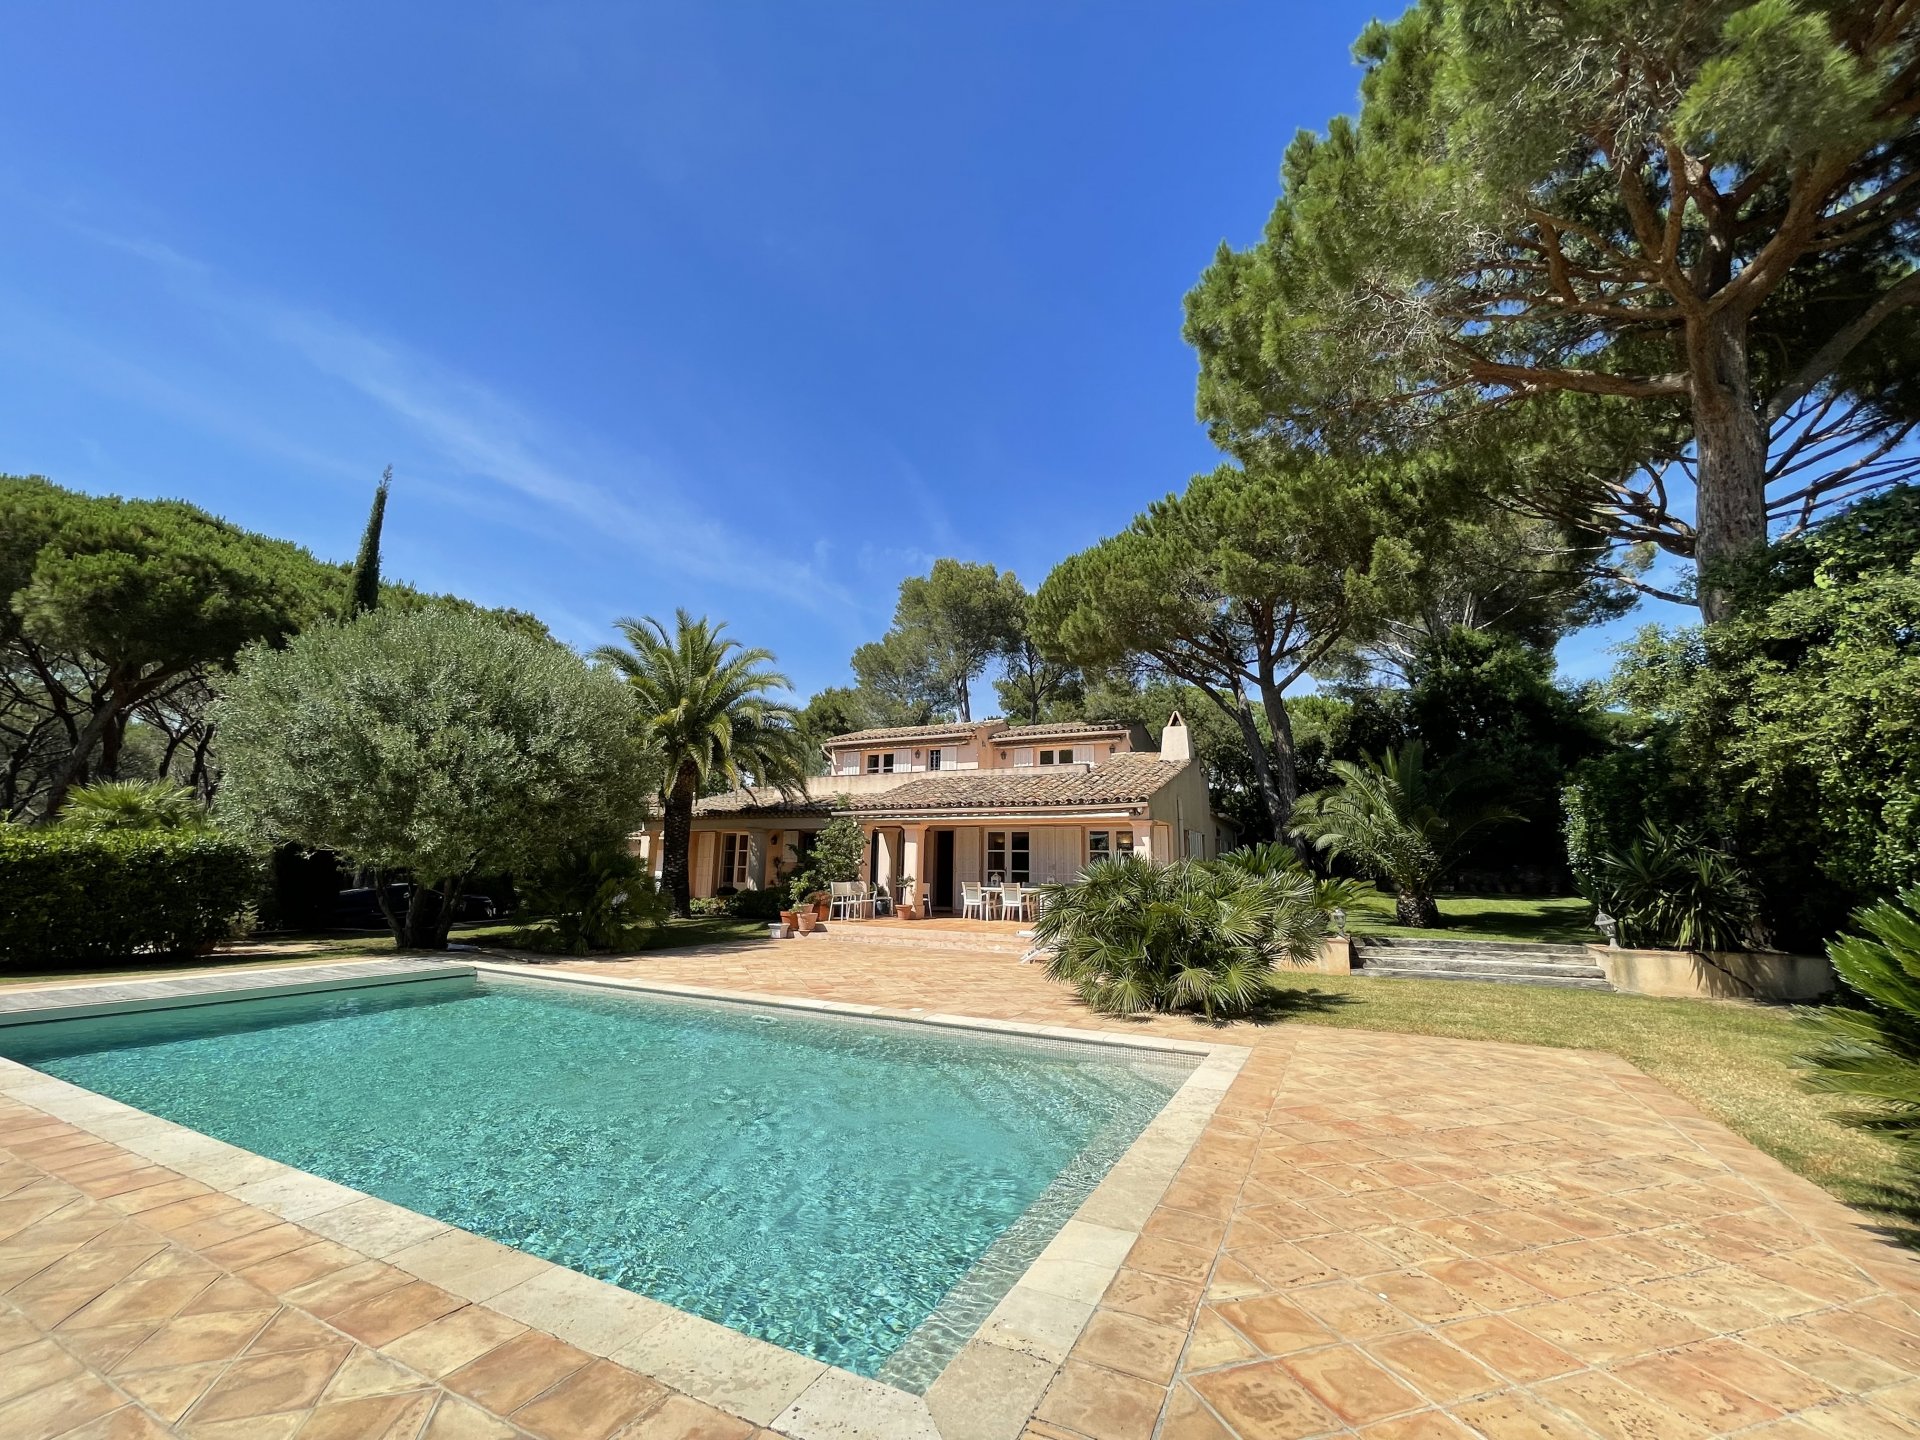 Lovely provencal villa for sale in Ramatuelle. Walking distance to Pampelonne beach. 4 bedrooms, pool & garage. Large potential